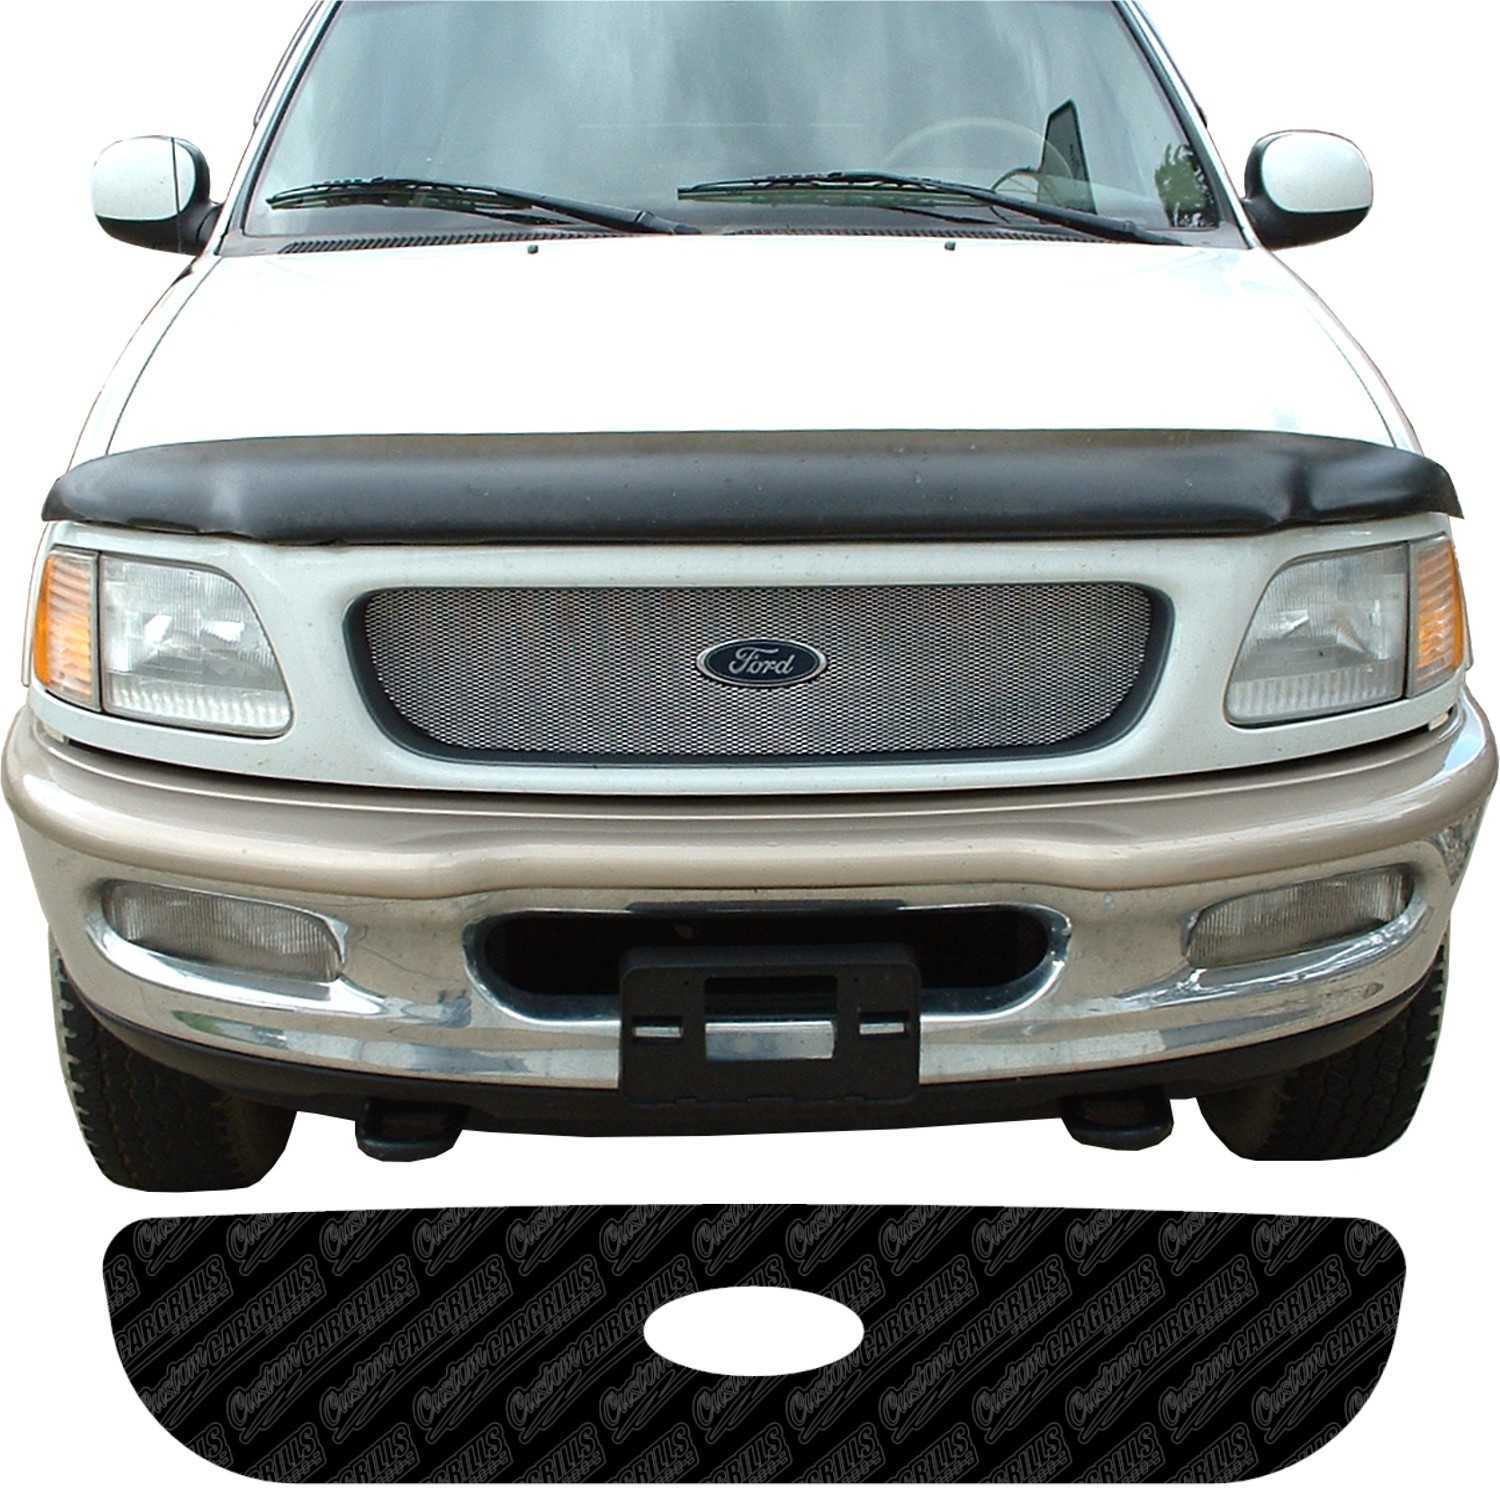 1997 - 1998 Ford F-150 Mesh Grill Template #1